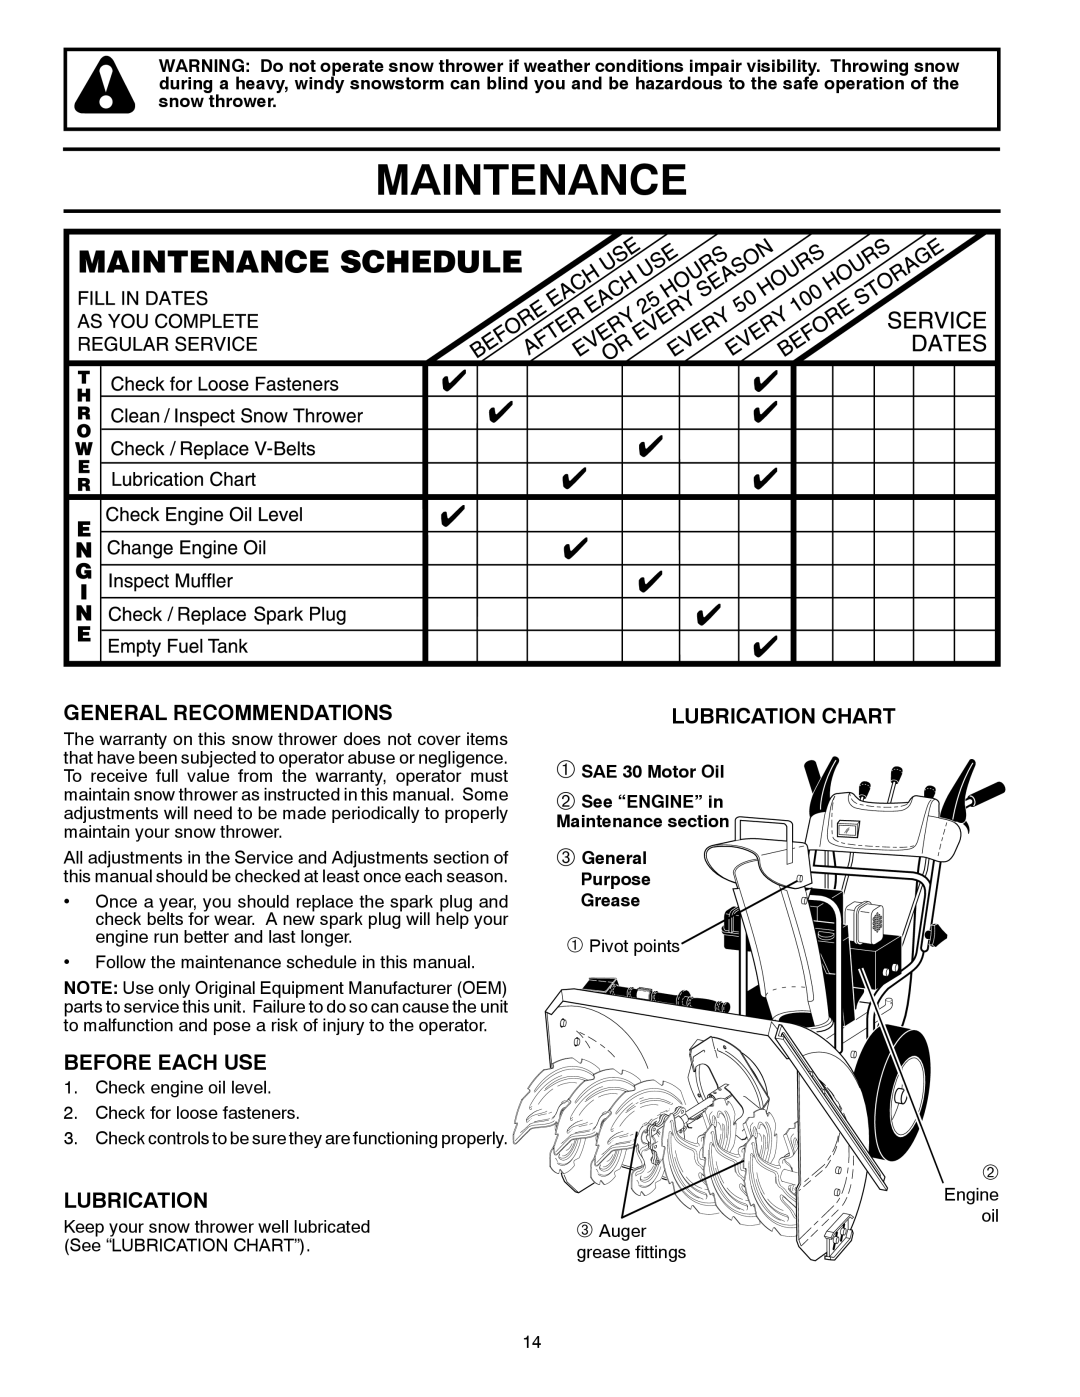 Husqvarna 924SB-XLS owner manual Maintenance, General Recommendations, Before Each Use, Lubrication Chart 